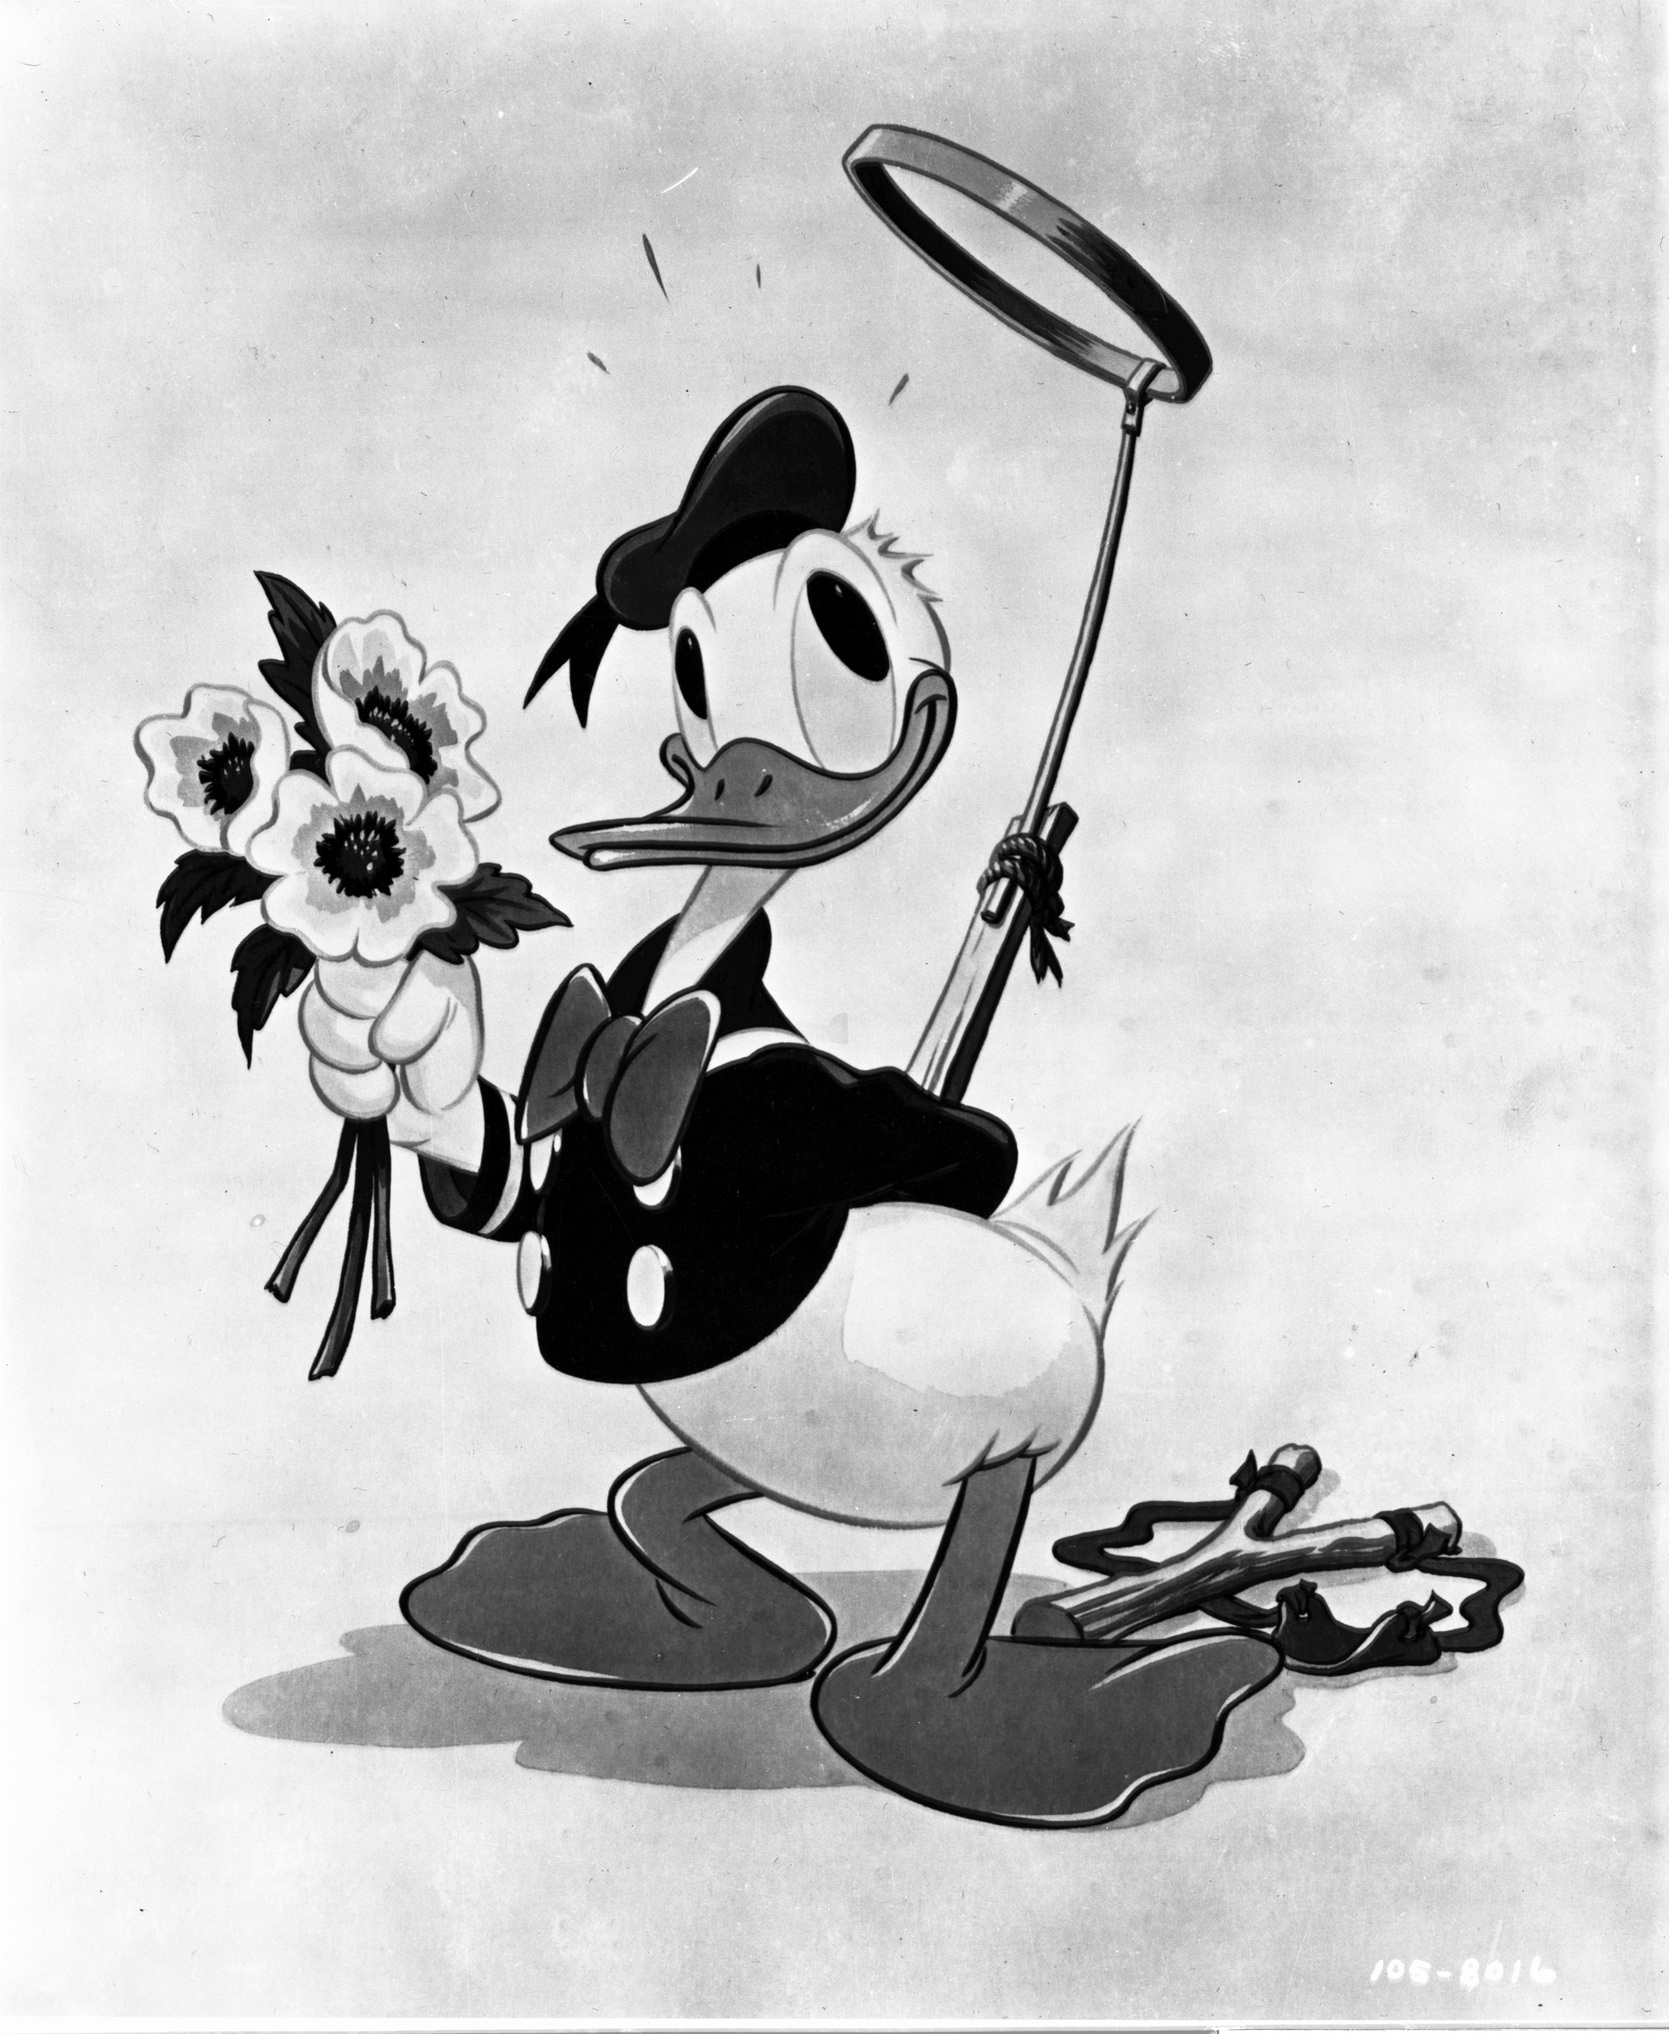 10 things you need to know about birthday boy Donald Duck